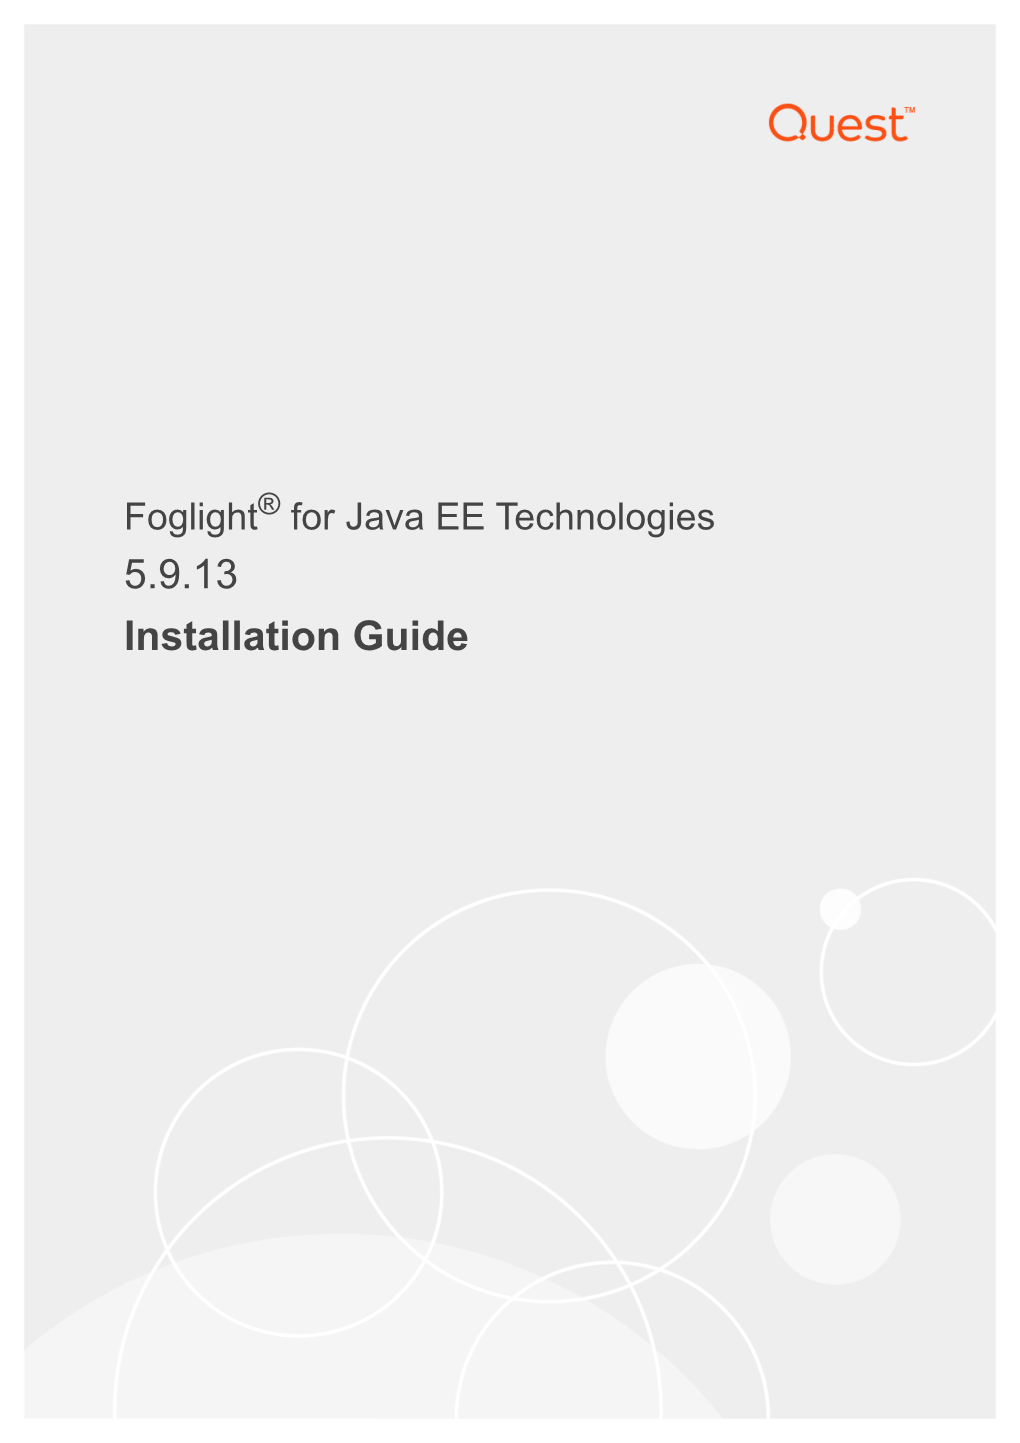 Foglight for Java EE Technologies Installation Guide Updated - March 2018 Software Version - 5.9.13 Contents